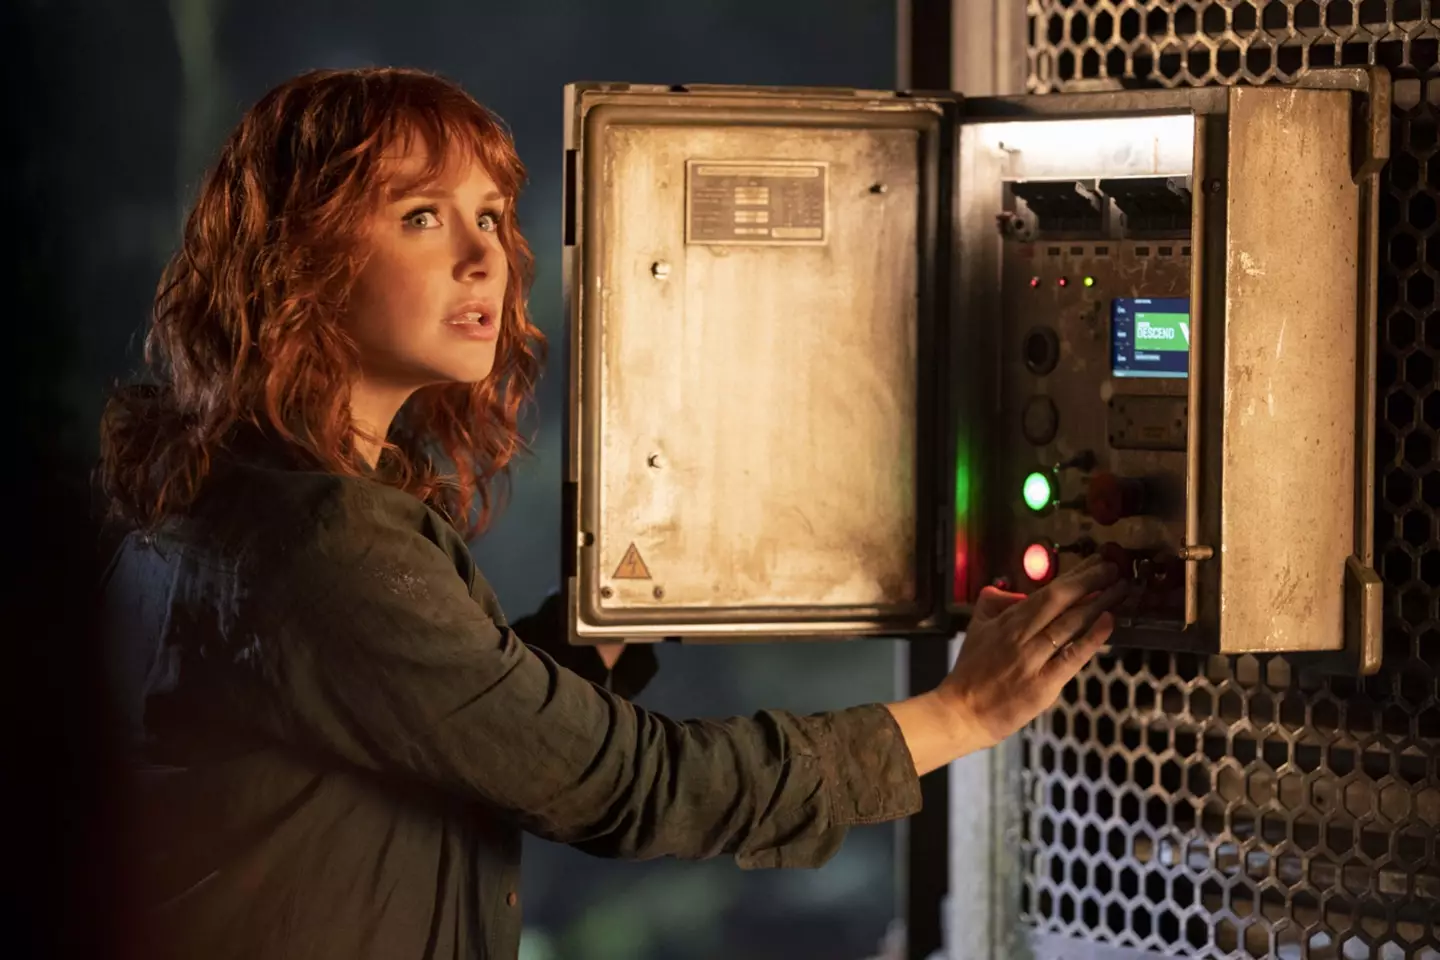 Bryce Dallas Howard revealed that execs suggested she lose weight for the third Jurassic World movie.